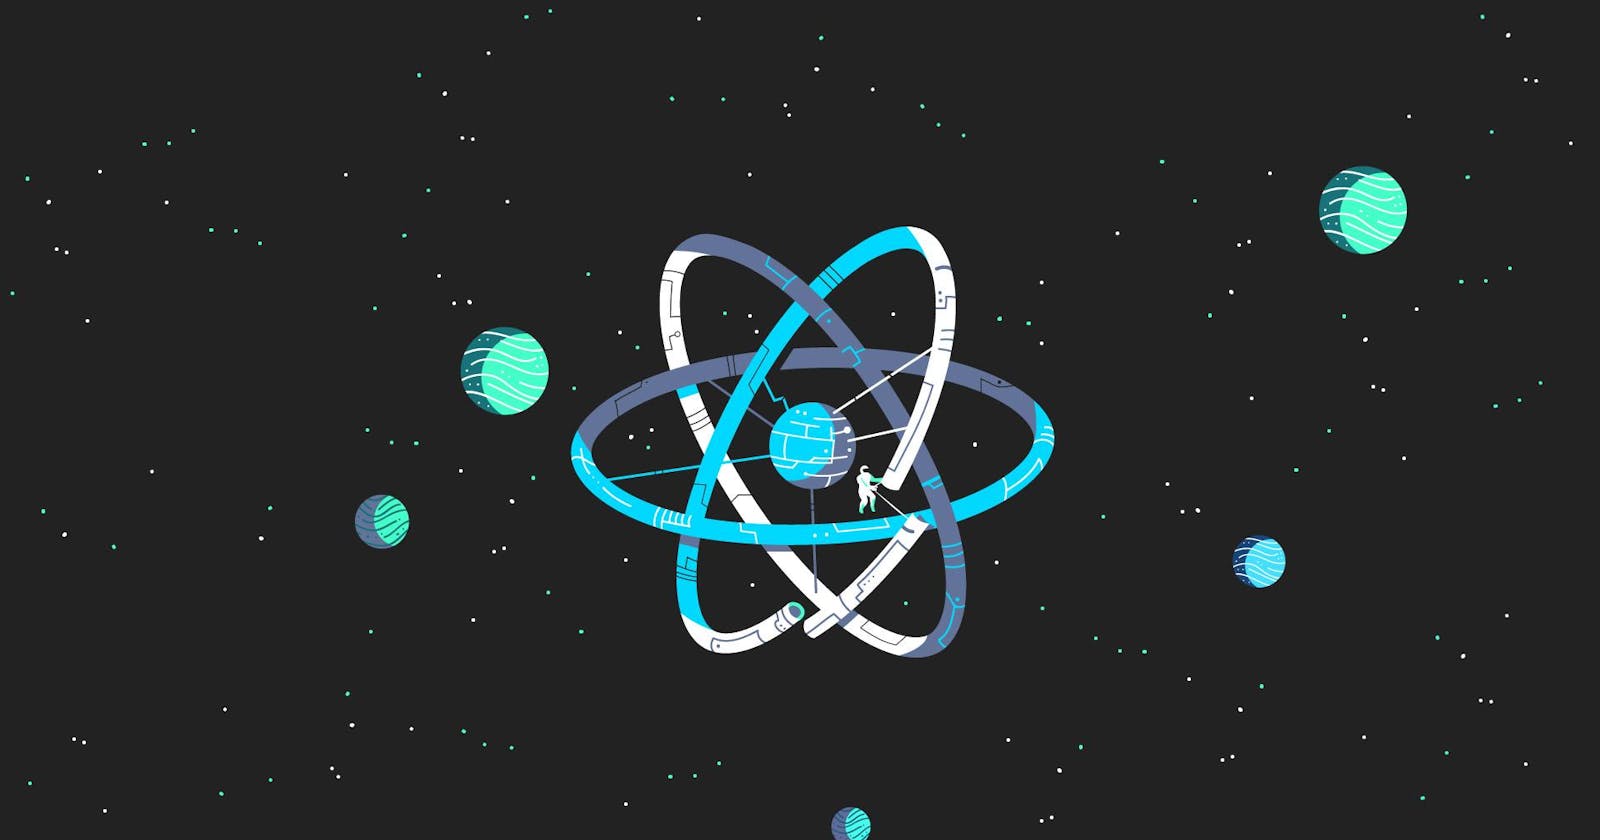 Exploring React Hooks: useEffect, useRef, Portals and Controlled/Uncontrolled Components